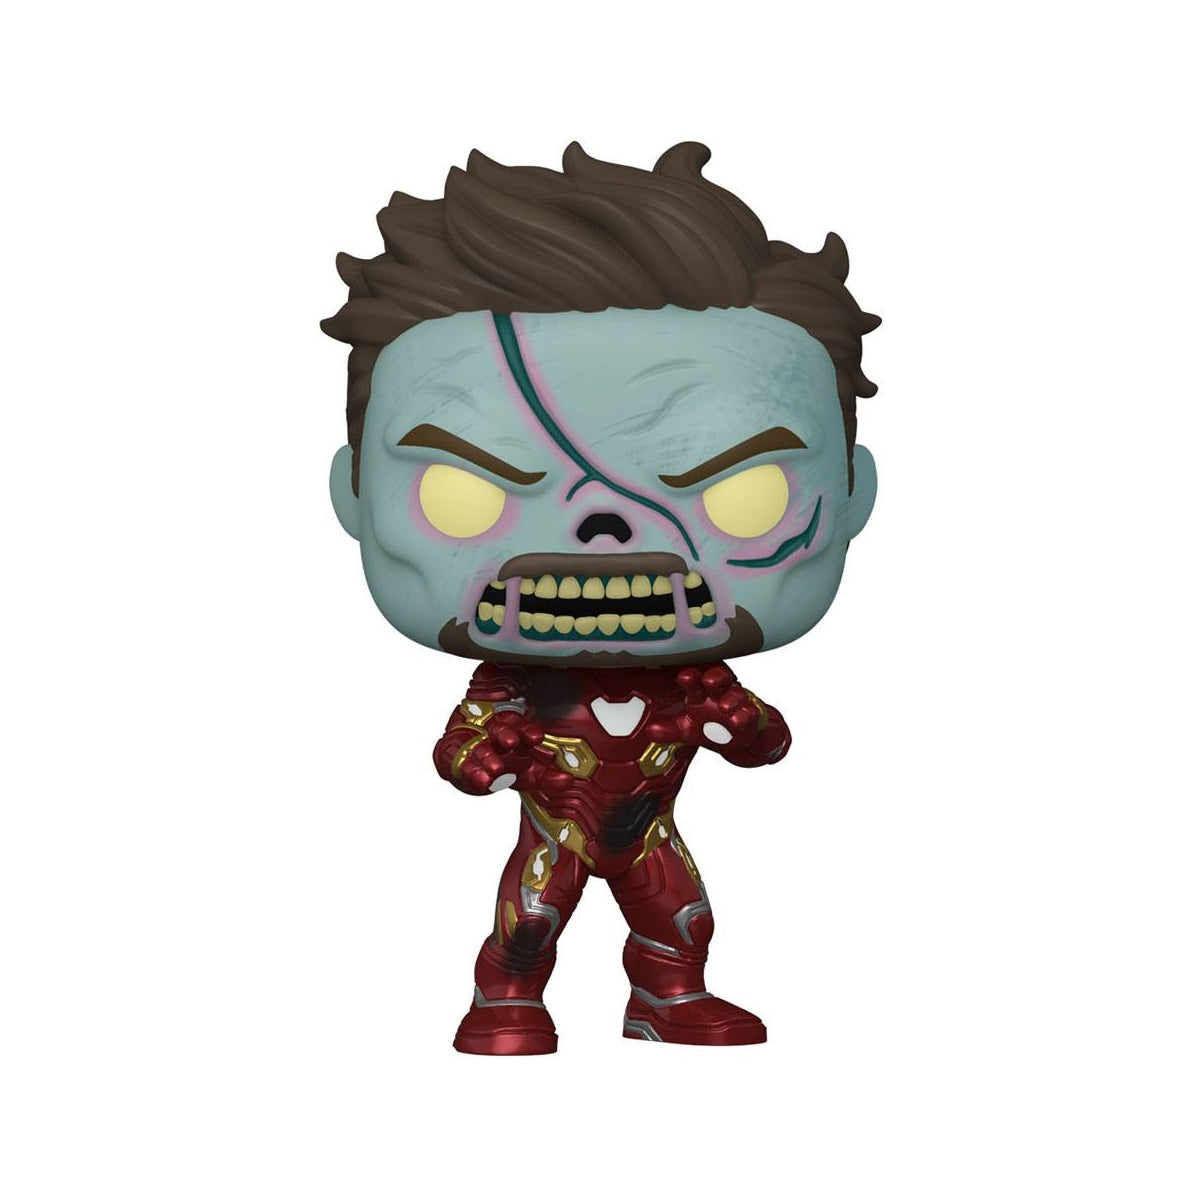 MARVEL WHAT IF POP N° 944 Zombie Iron Man Marvel What If...? POP! TV Vinyl Figurine Zombie Iron Man 9 cm